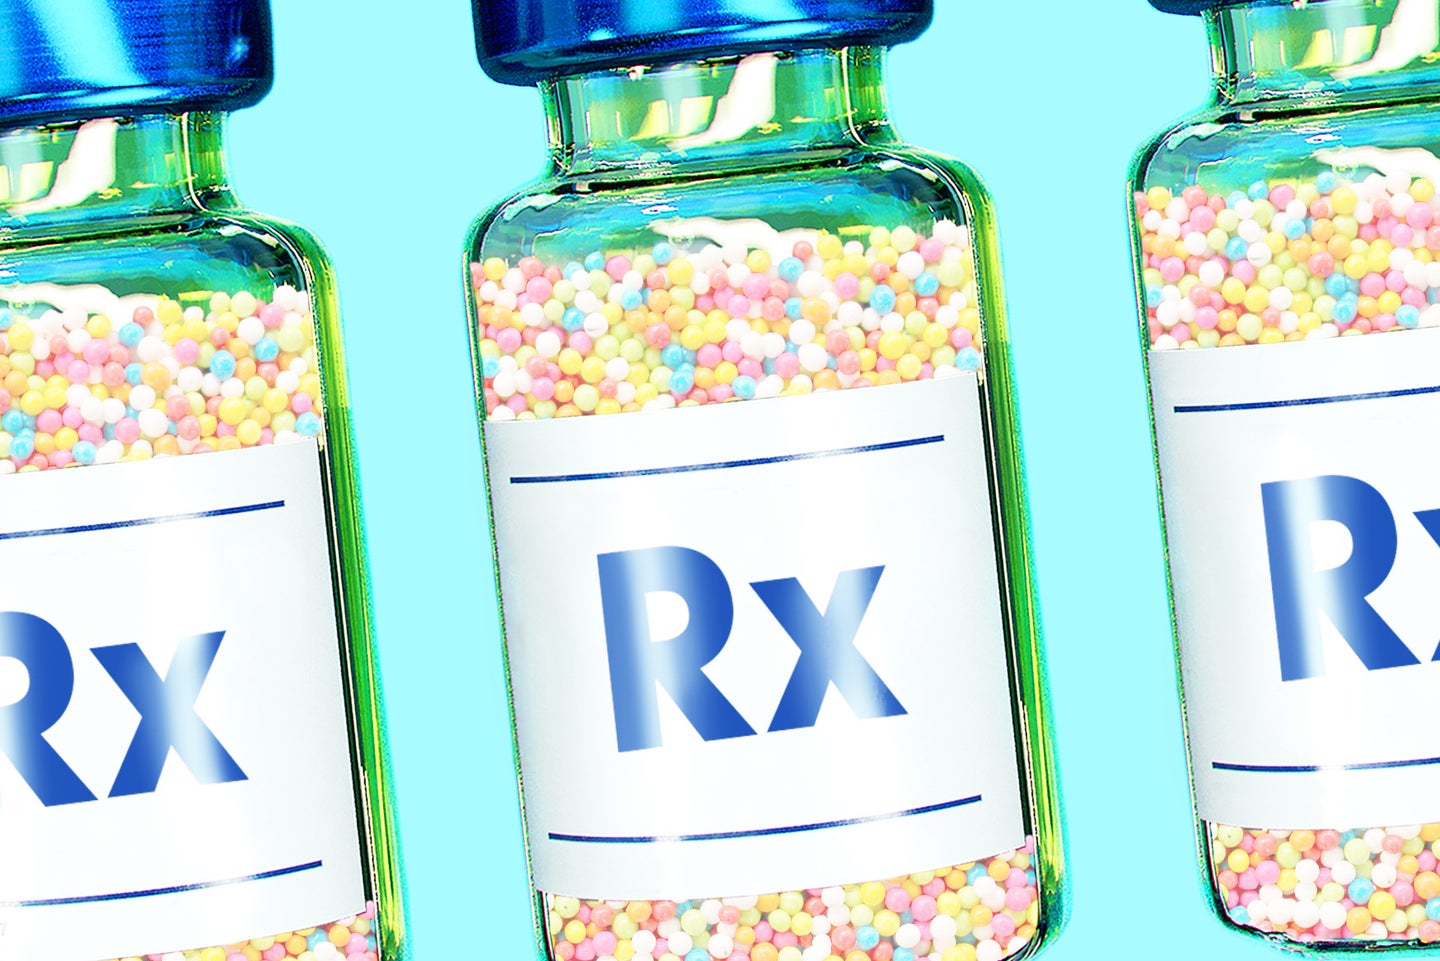 three vaccine bottles with "RX" on their labels, filled with small frozen beads of ice cream